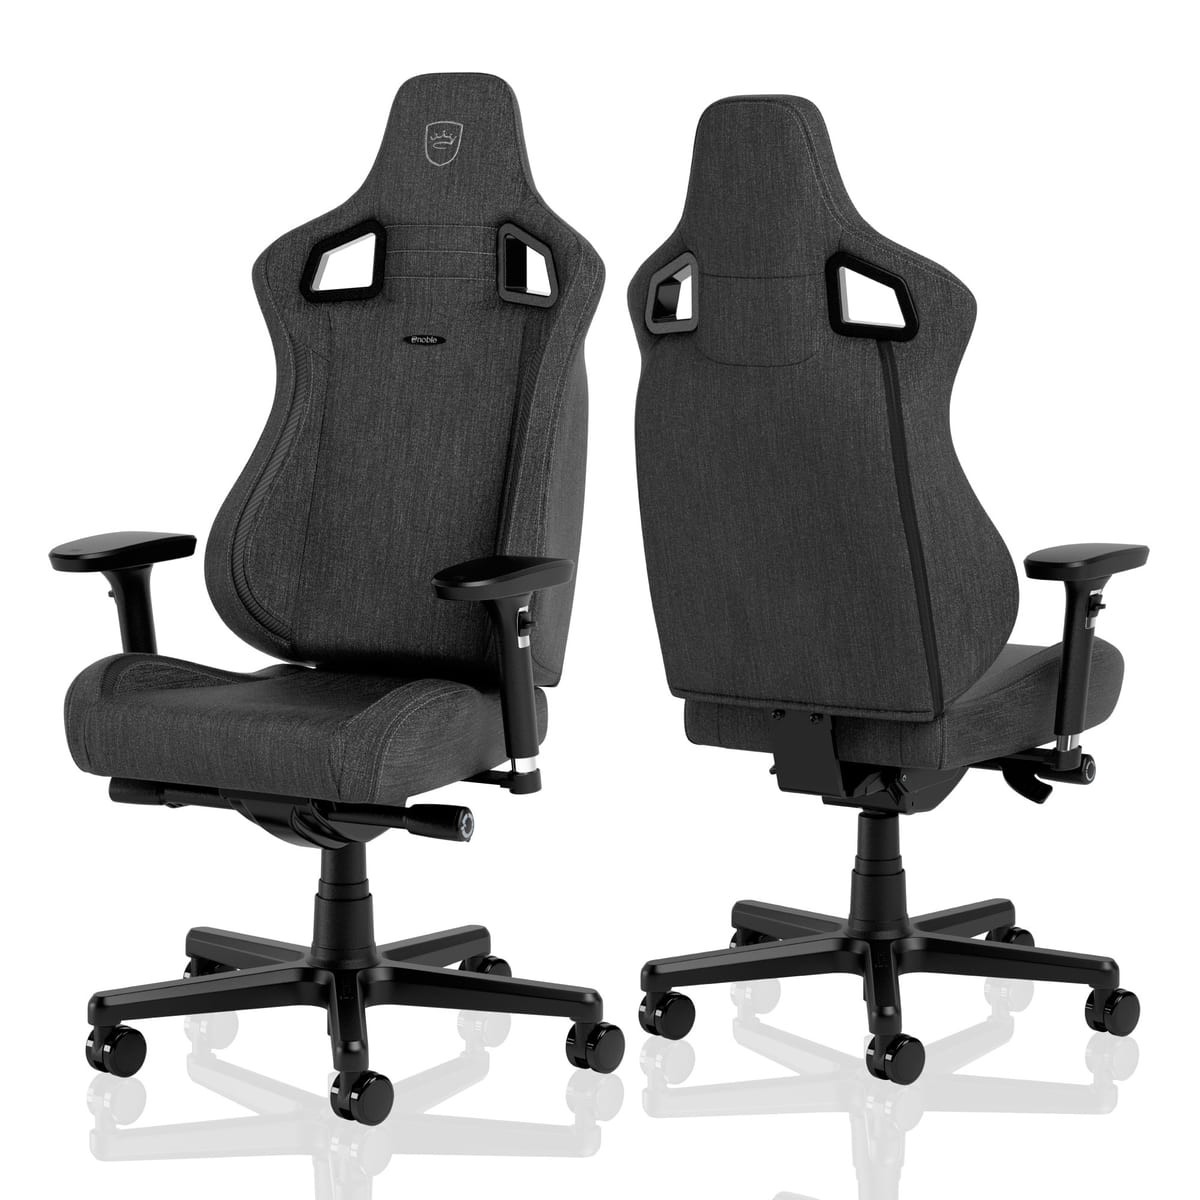 noblechairs(ノーブルチェアーズ)「EPIC COMPACT」５